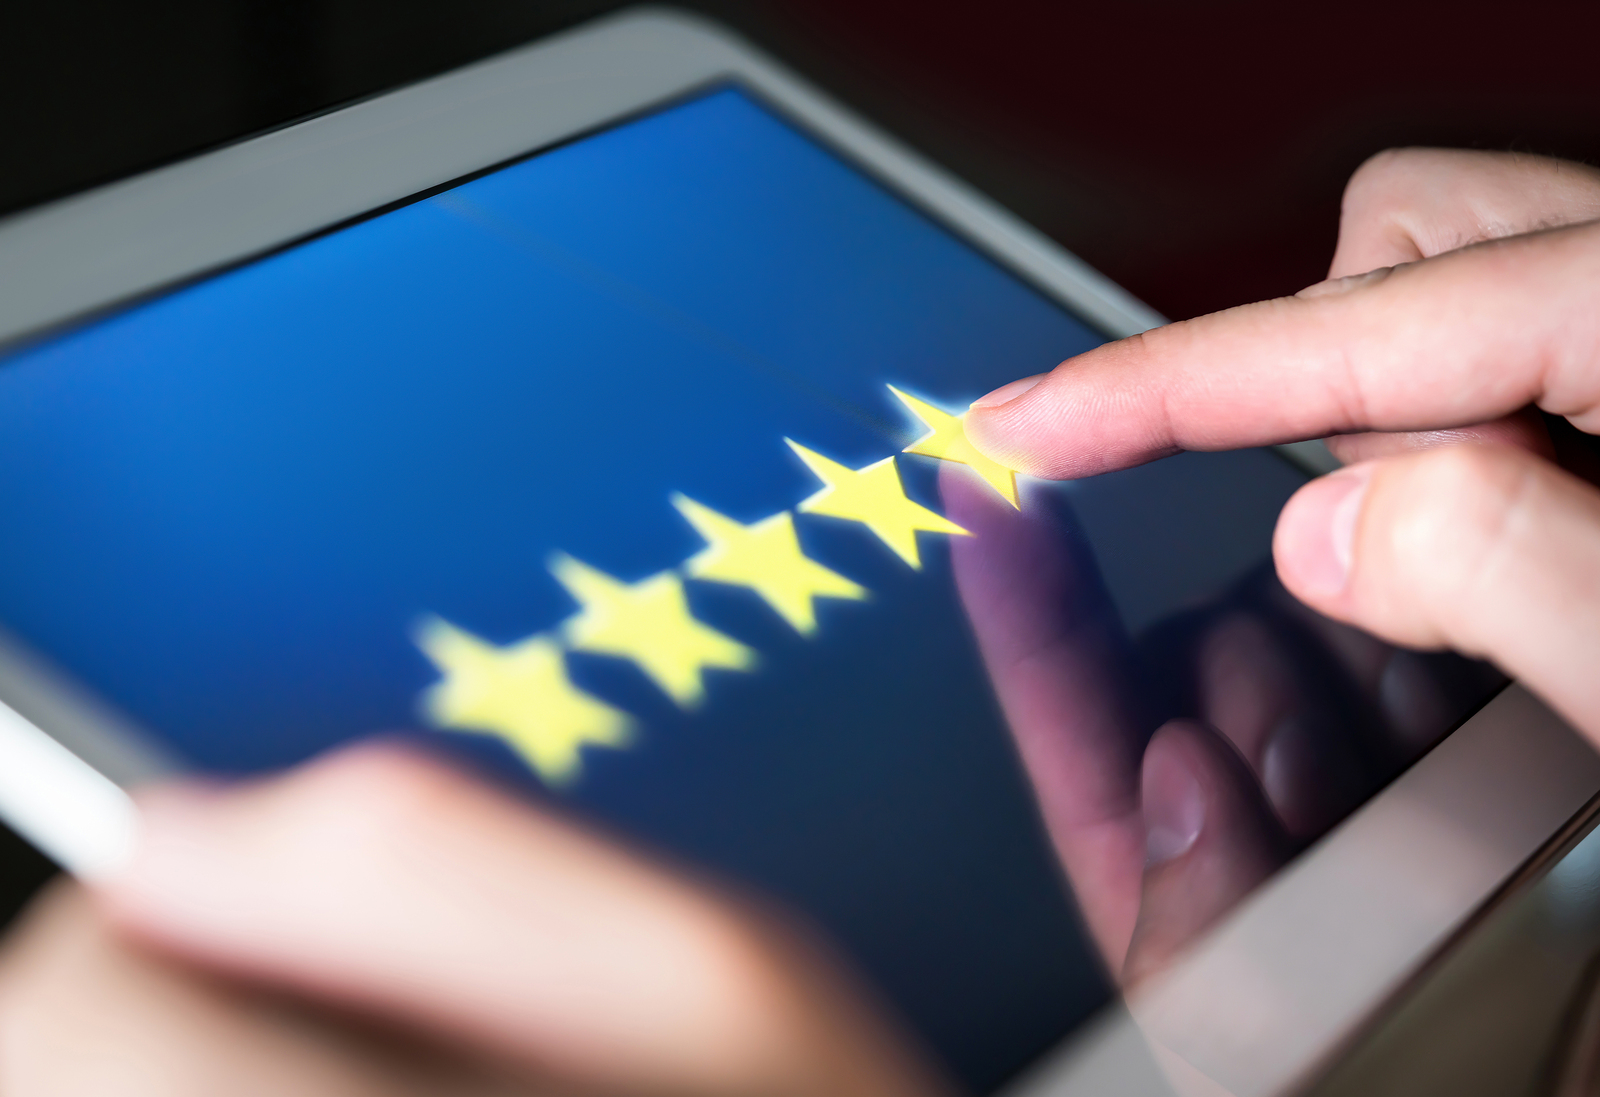 centris improve amazon customer service ratings and sales